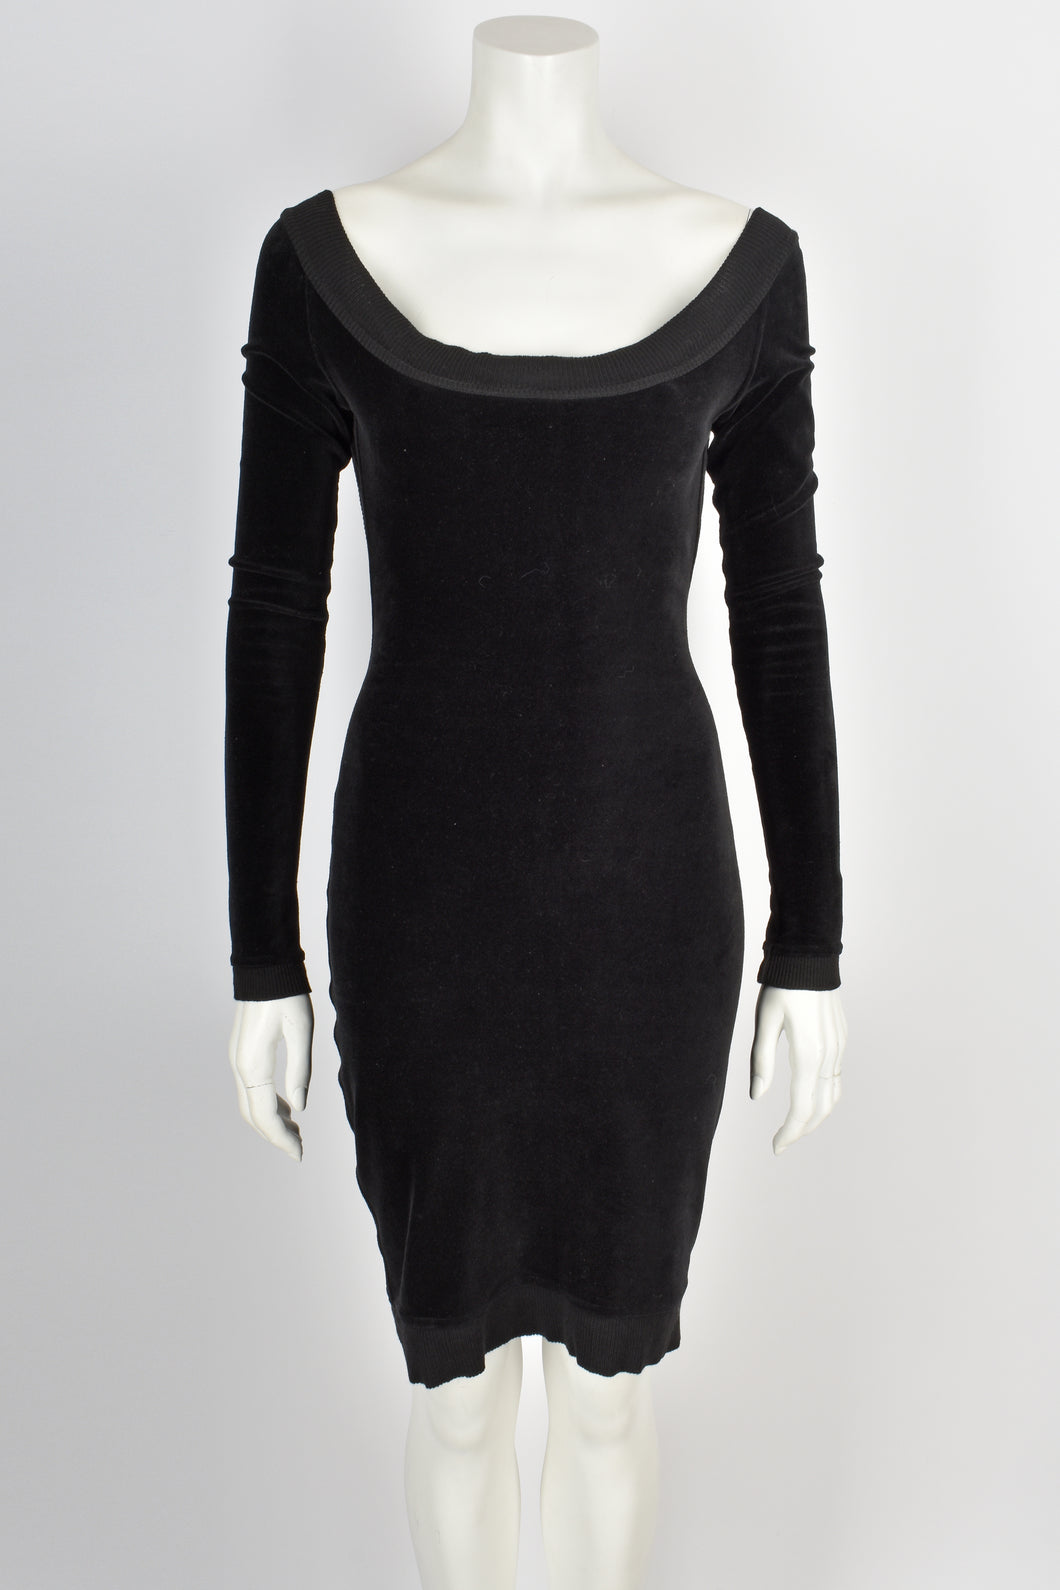 ALAIA 90s plunging open back dress M